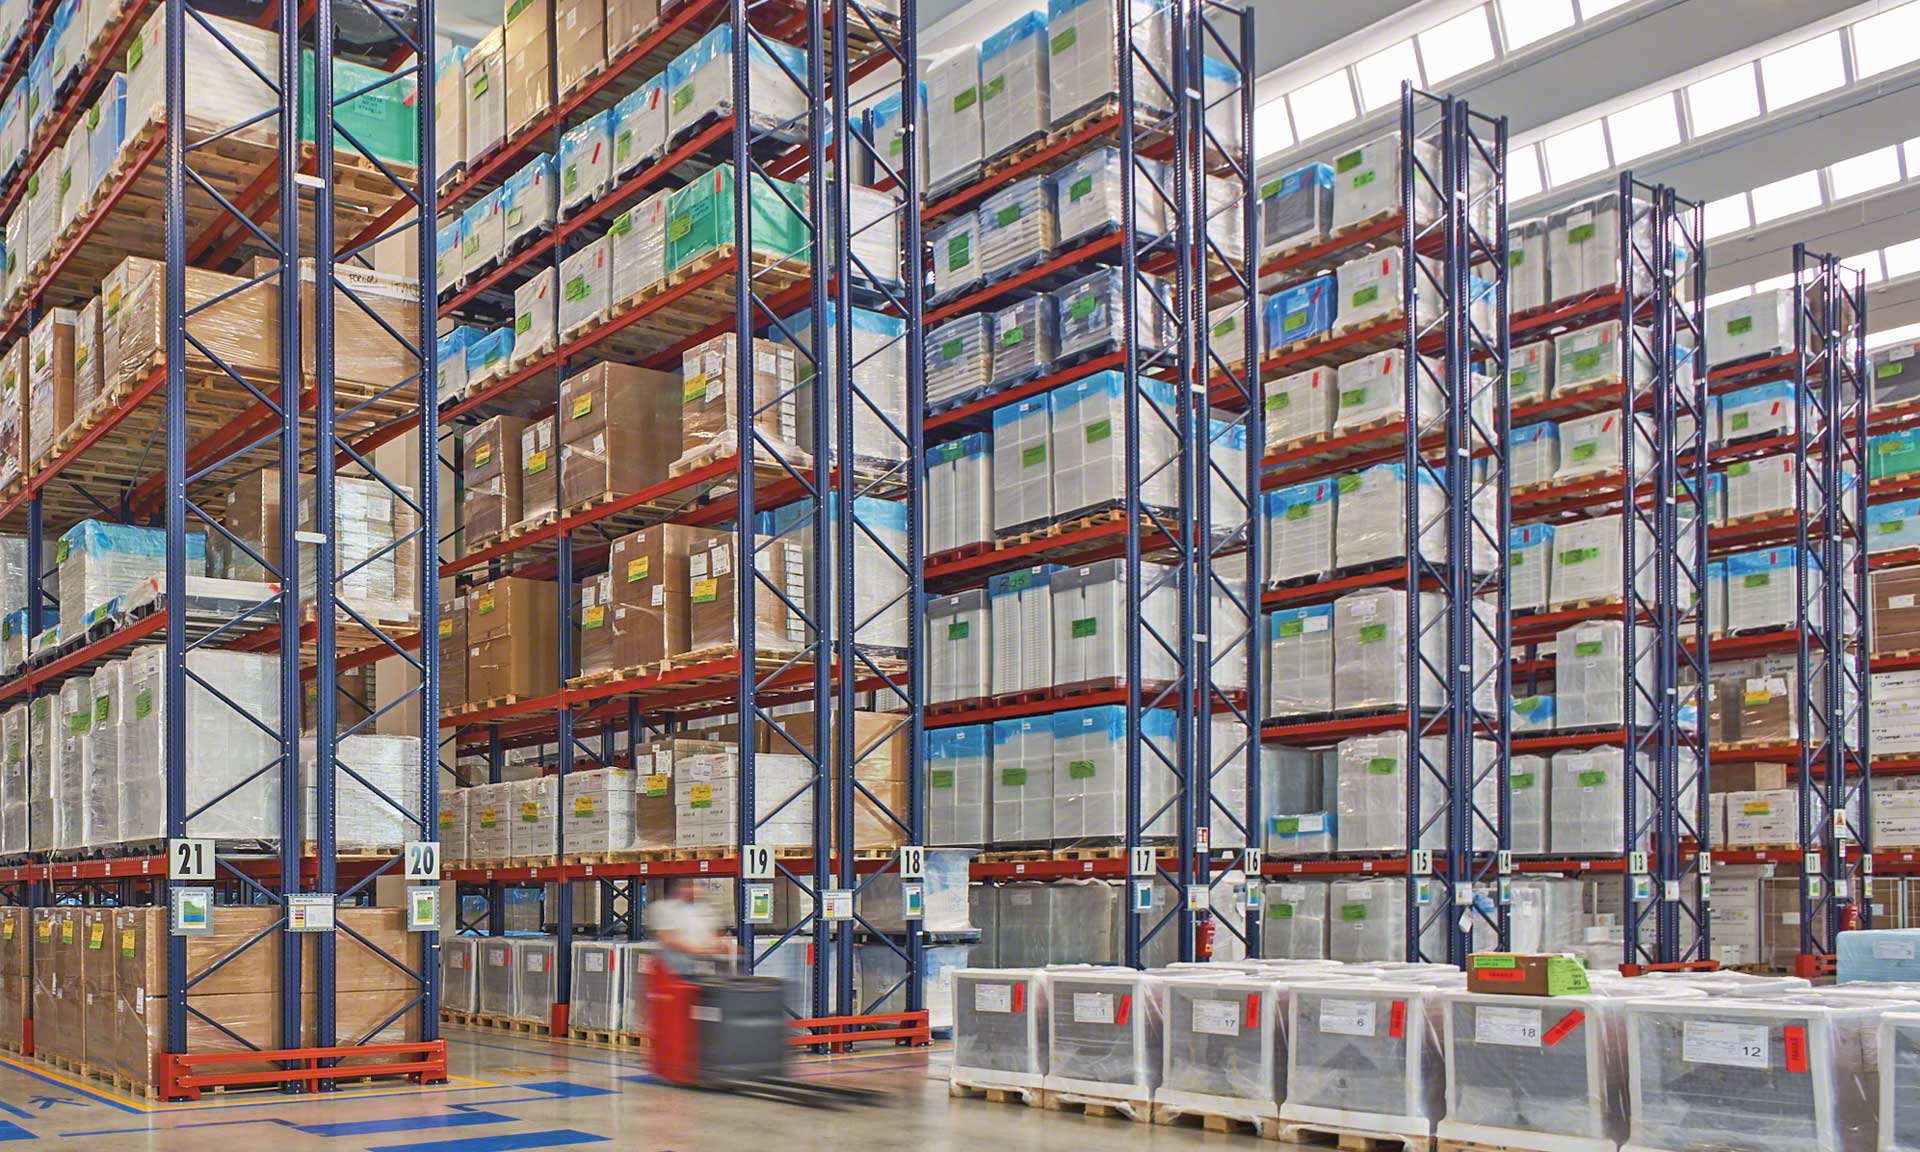 Chiggiato Transporti: earthquake-proof racks for pharmaceutical and medical products